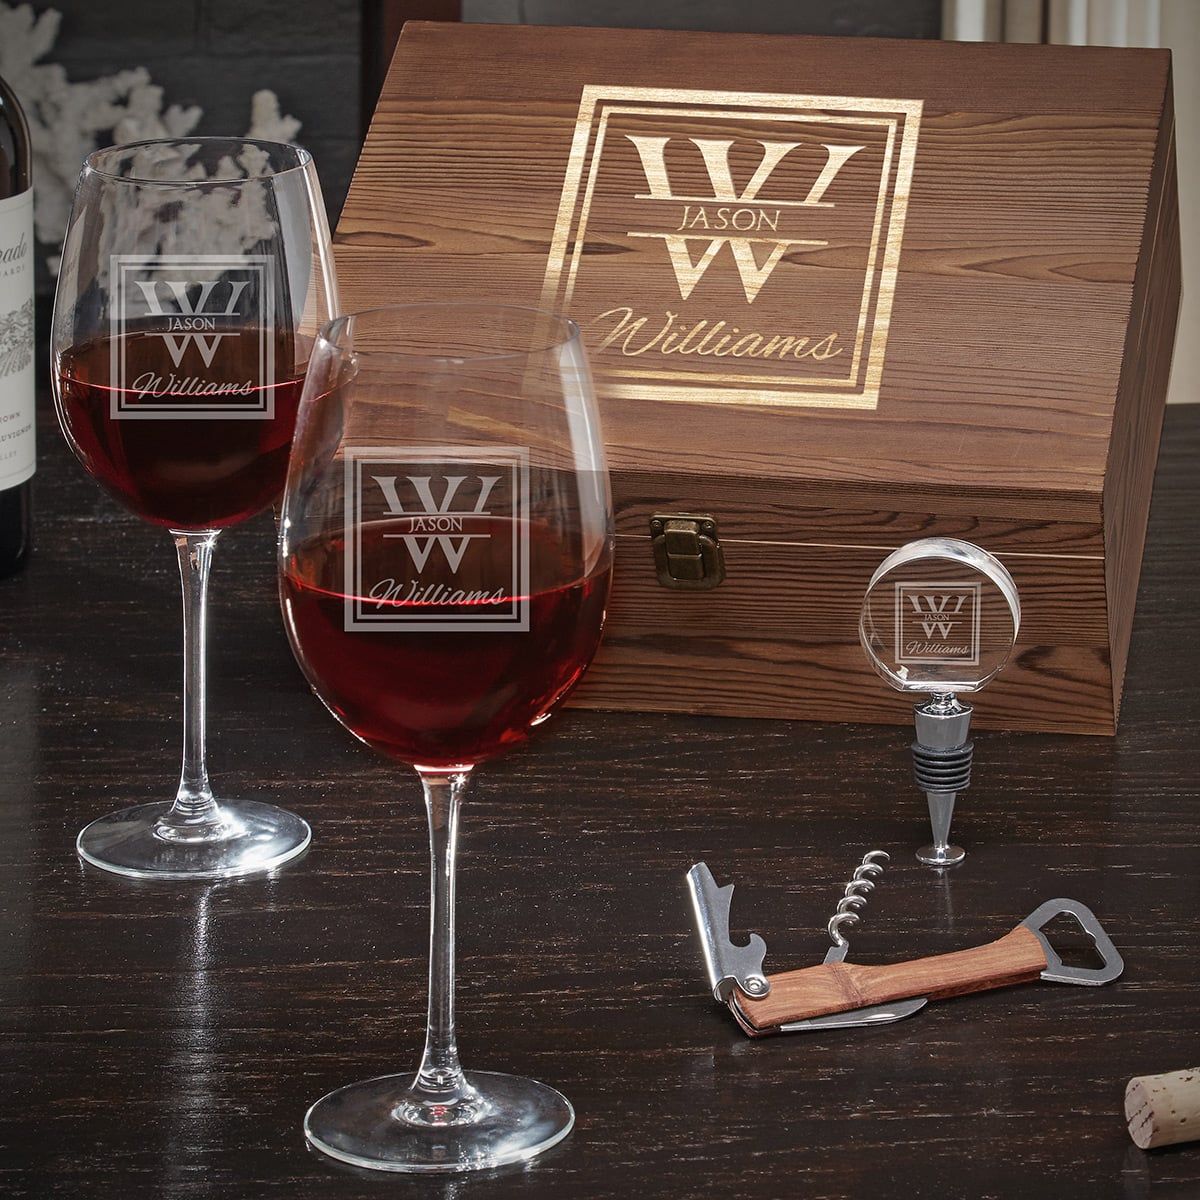 https://images.homewetbar.com/media/catalog/product/7/7/7740-oakhill-wine-lover-box-set-with-crystal-wine-stopper-primary.jpg?store=default&image-type=image